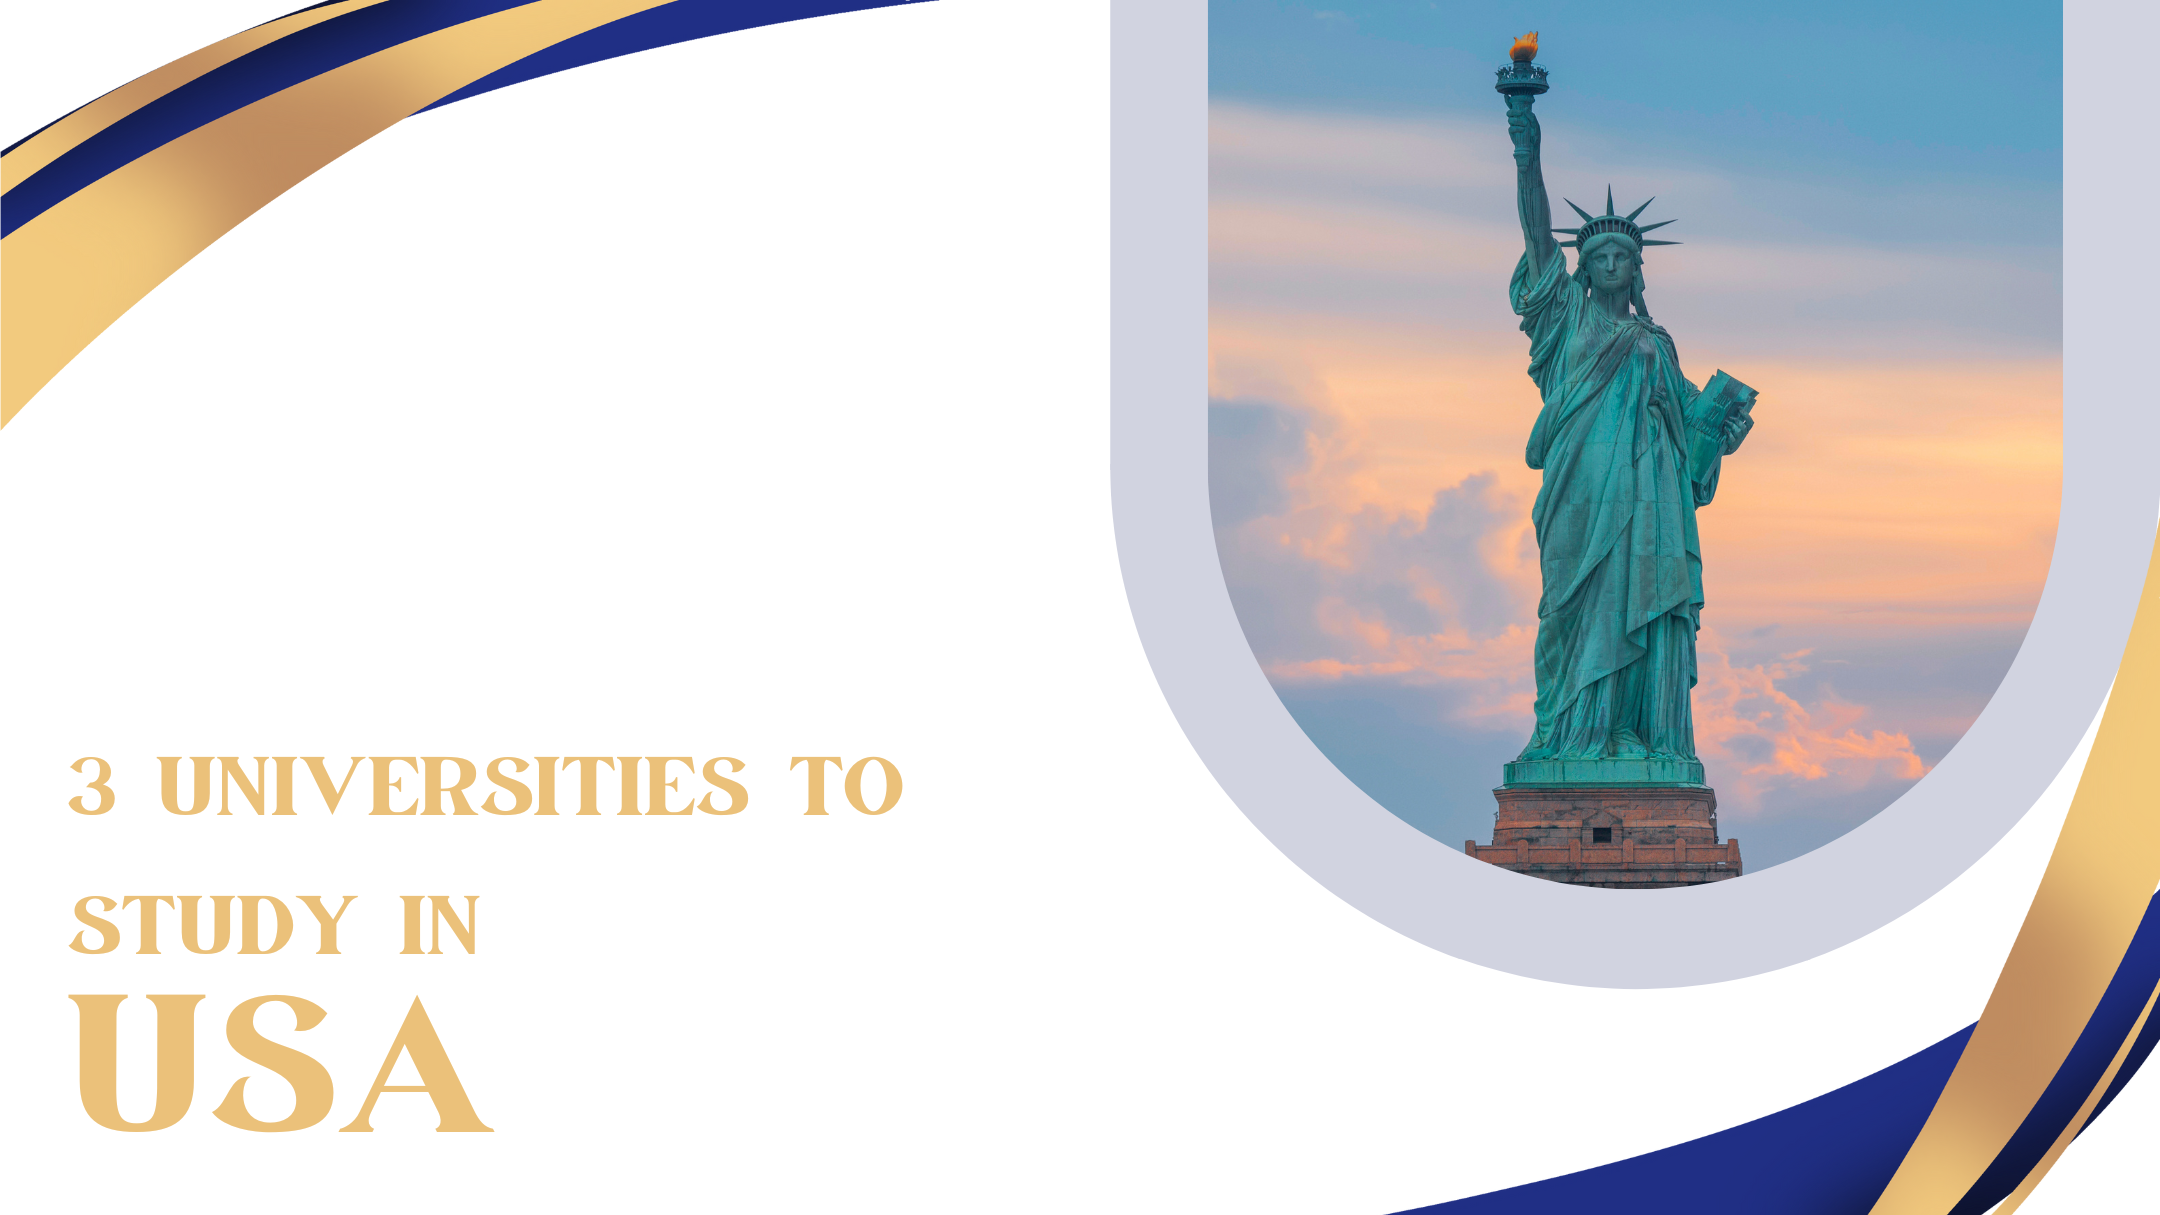 3 universities to study in the USA